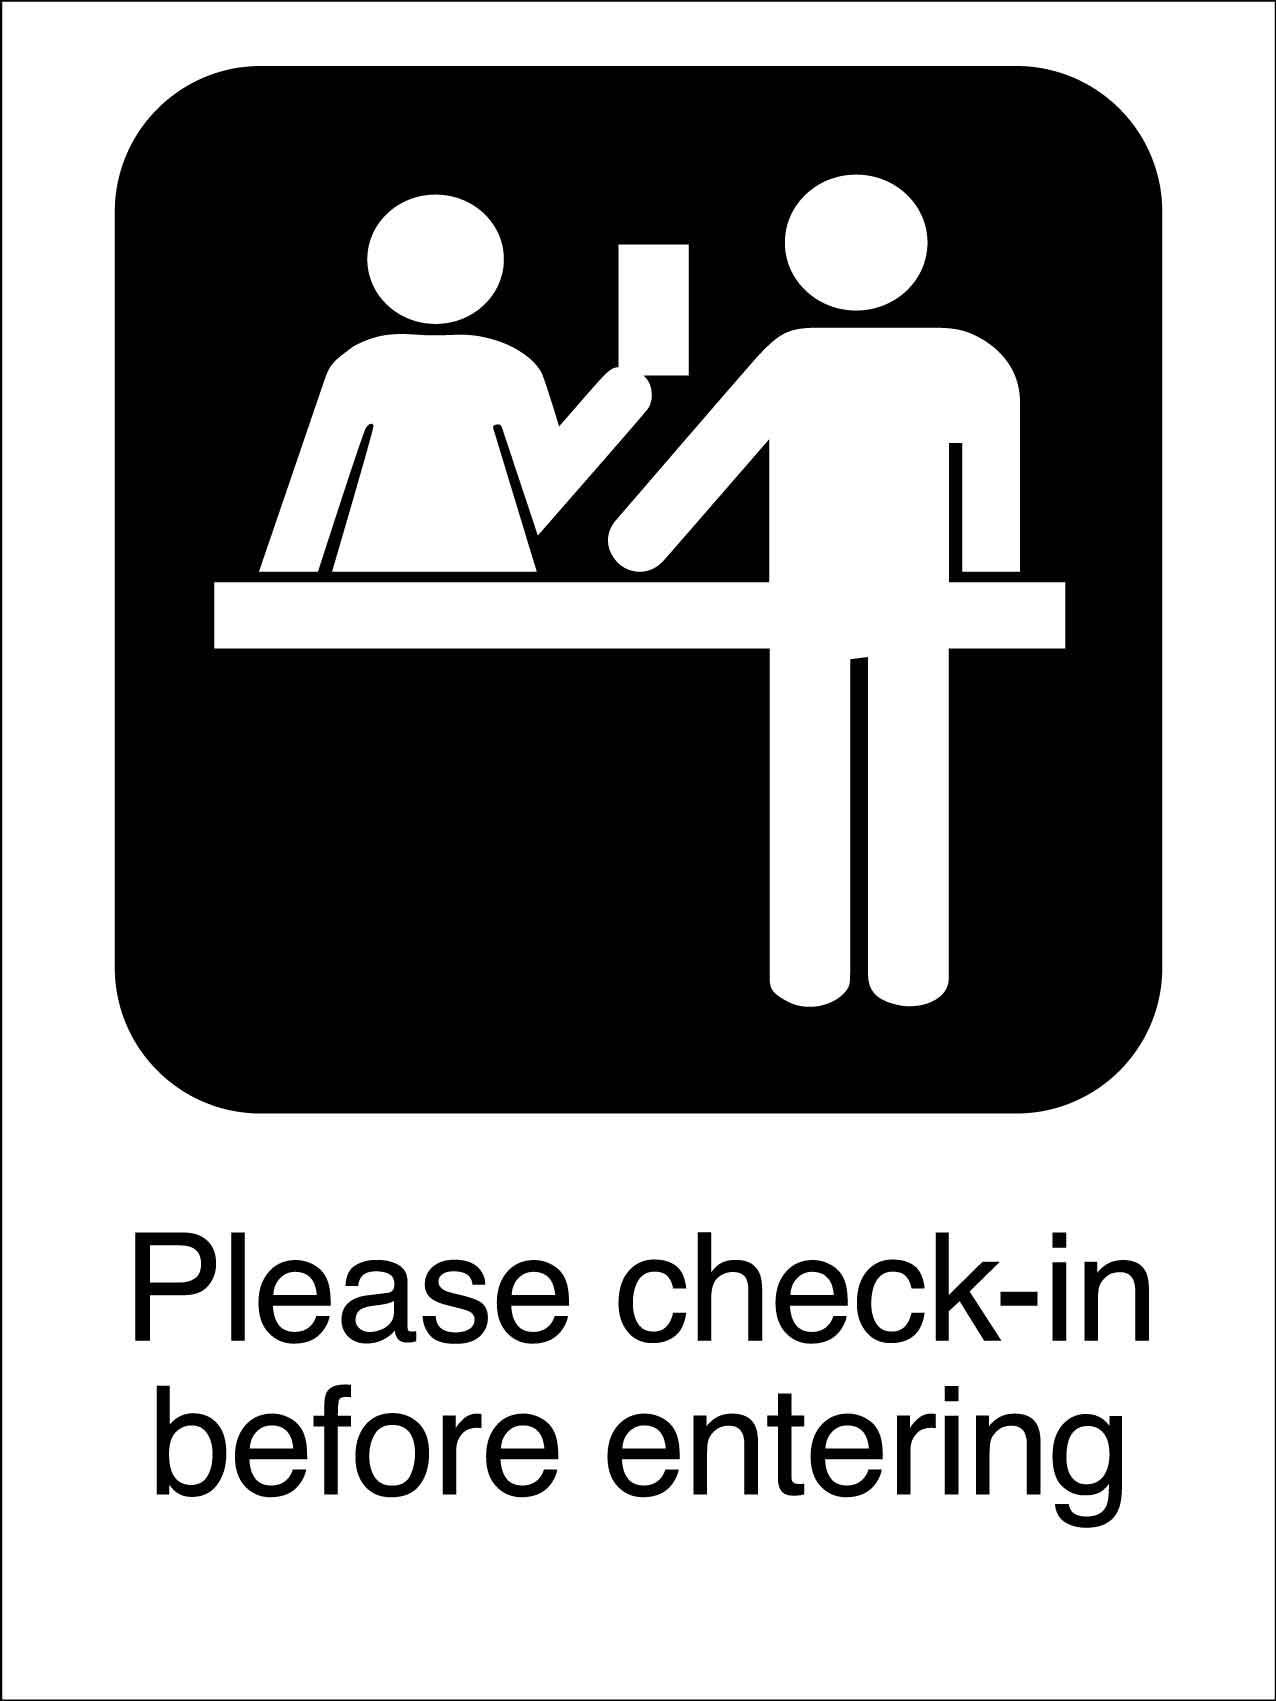 Please Check-in Before Entering Sign